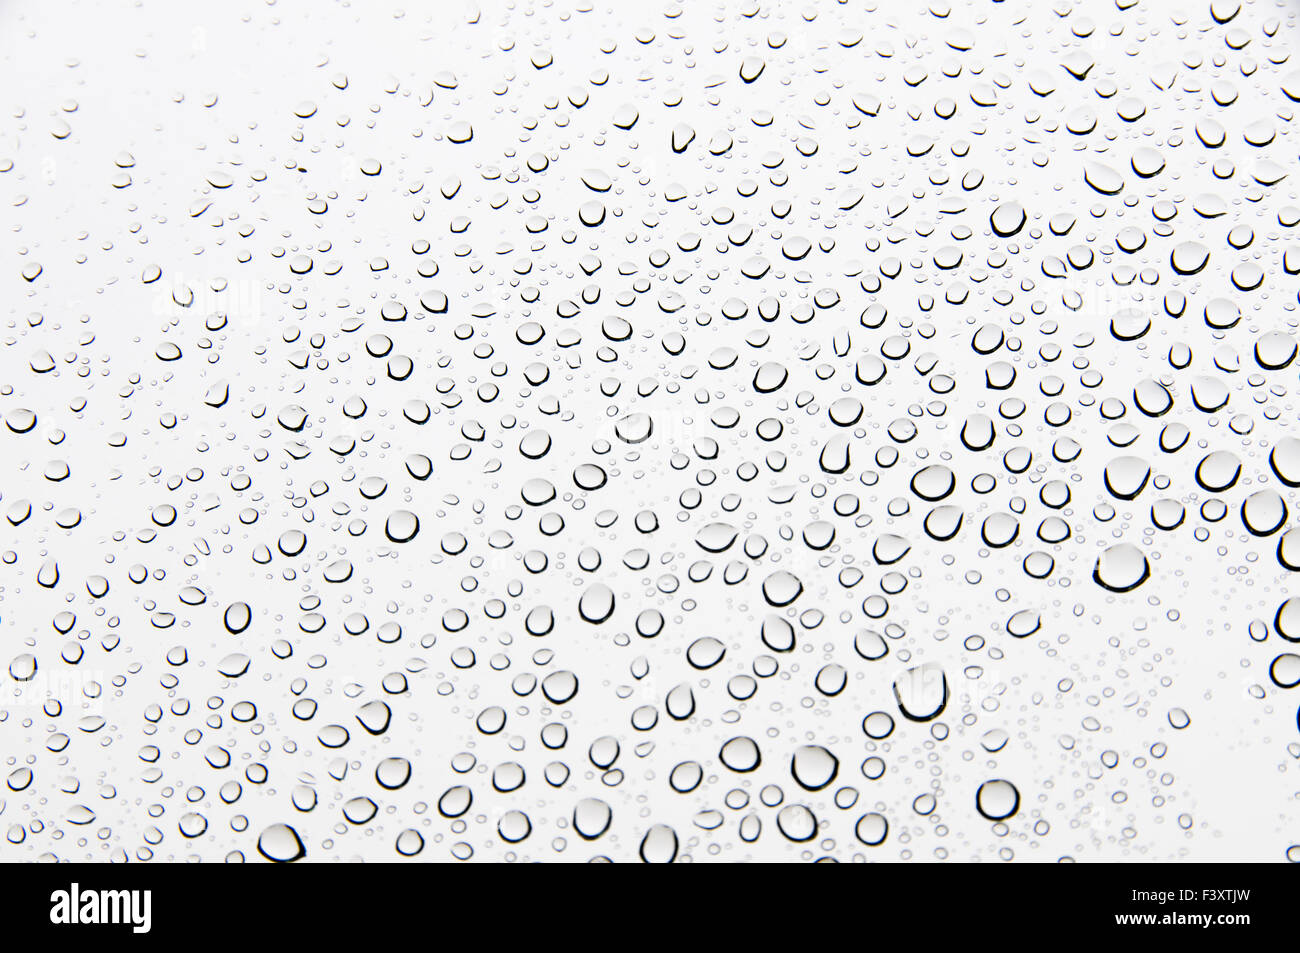 Background of water drops on glass Stock Photo